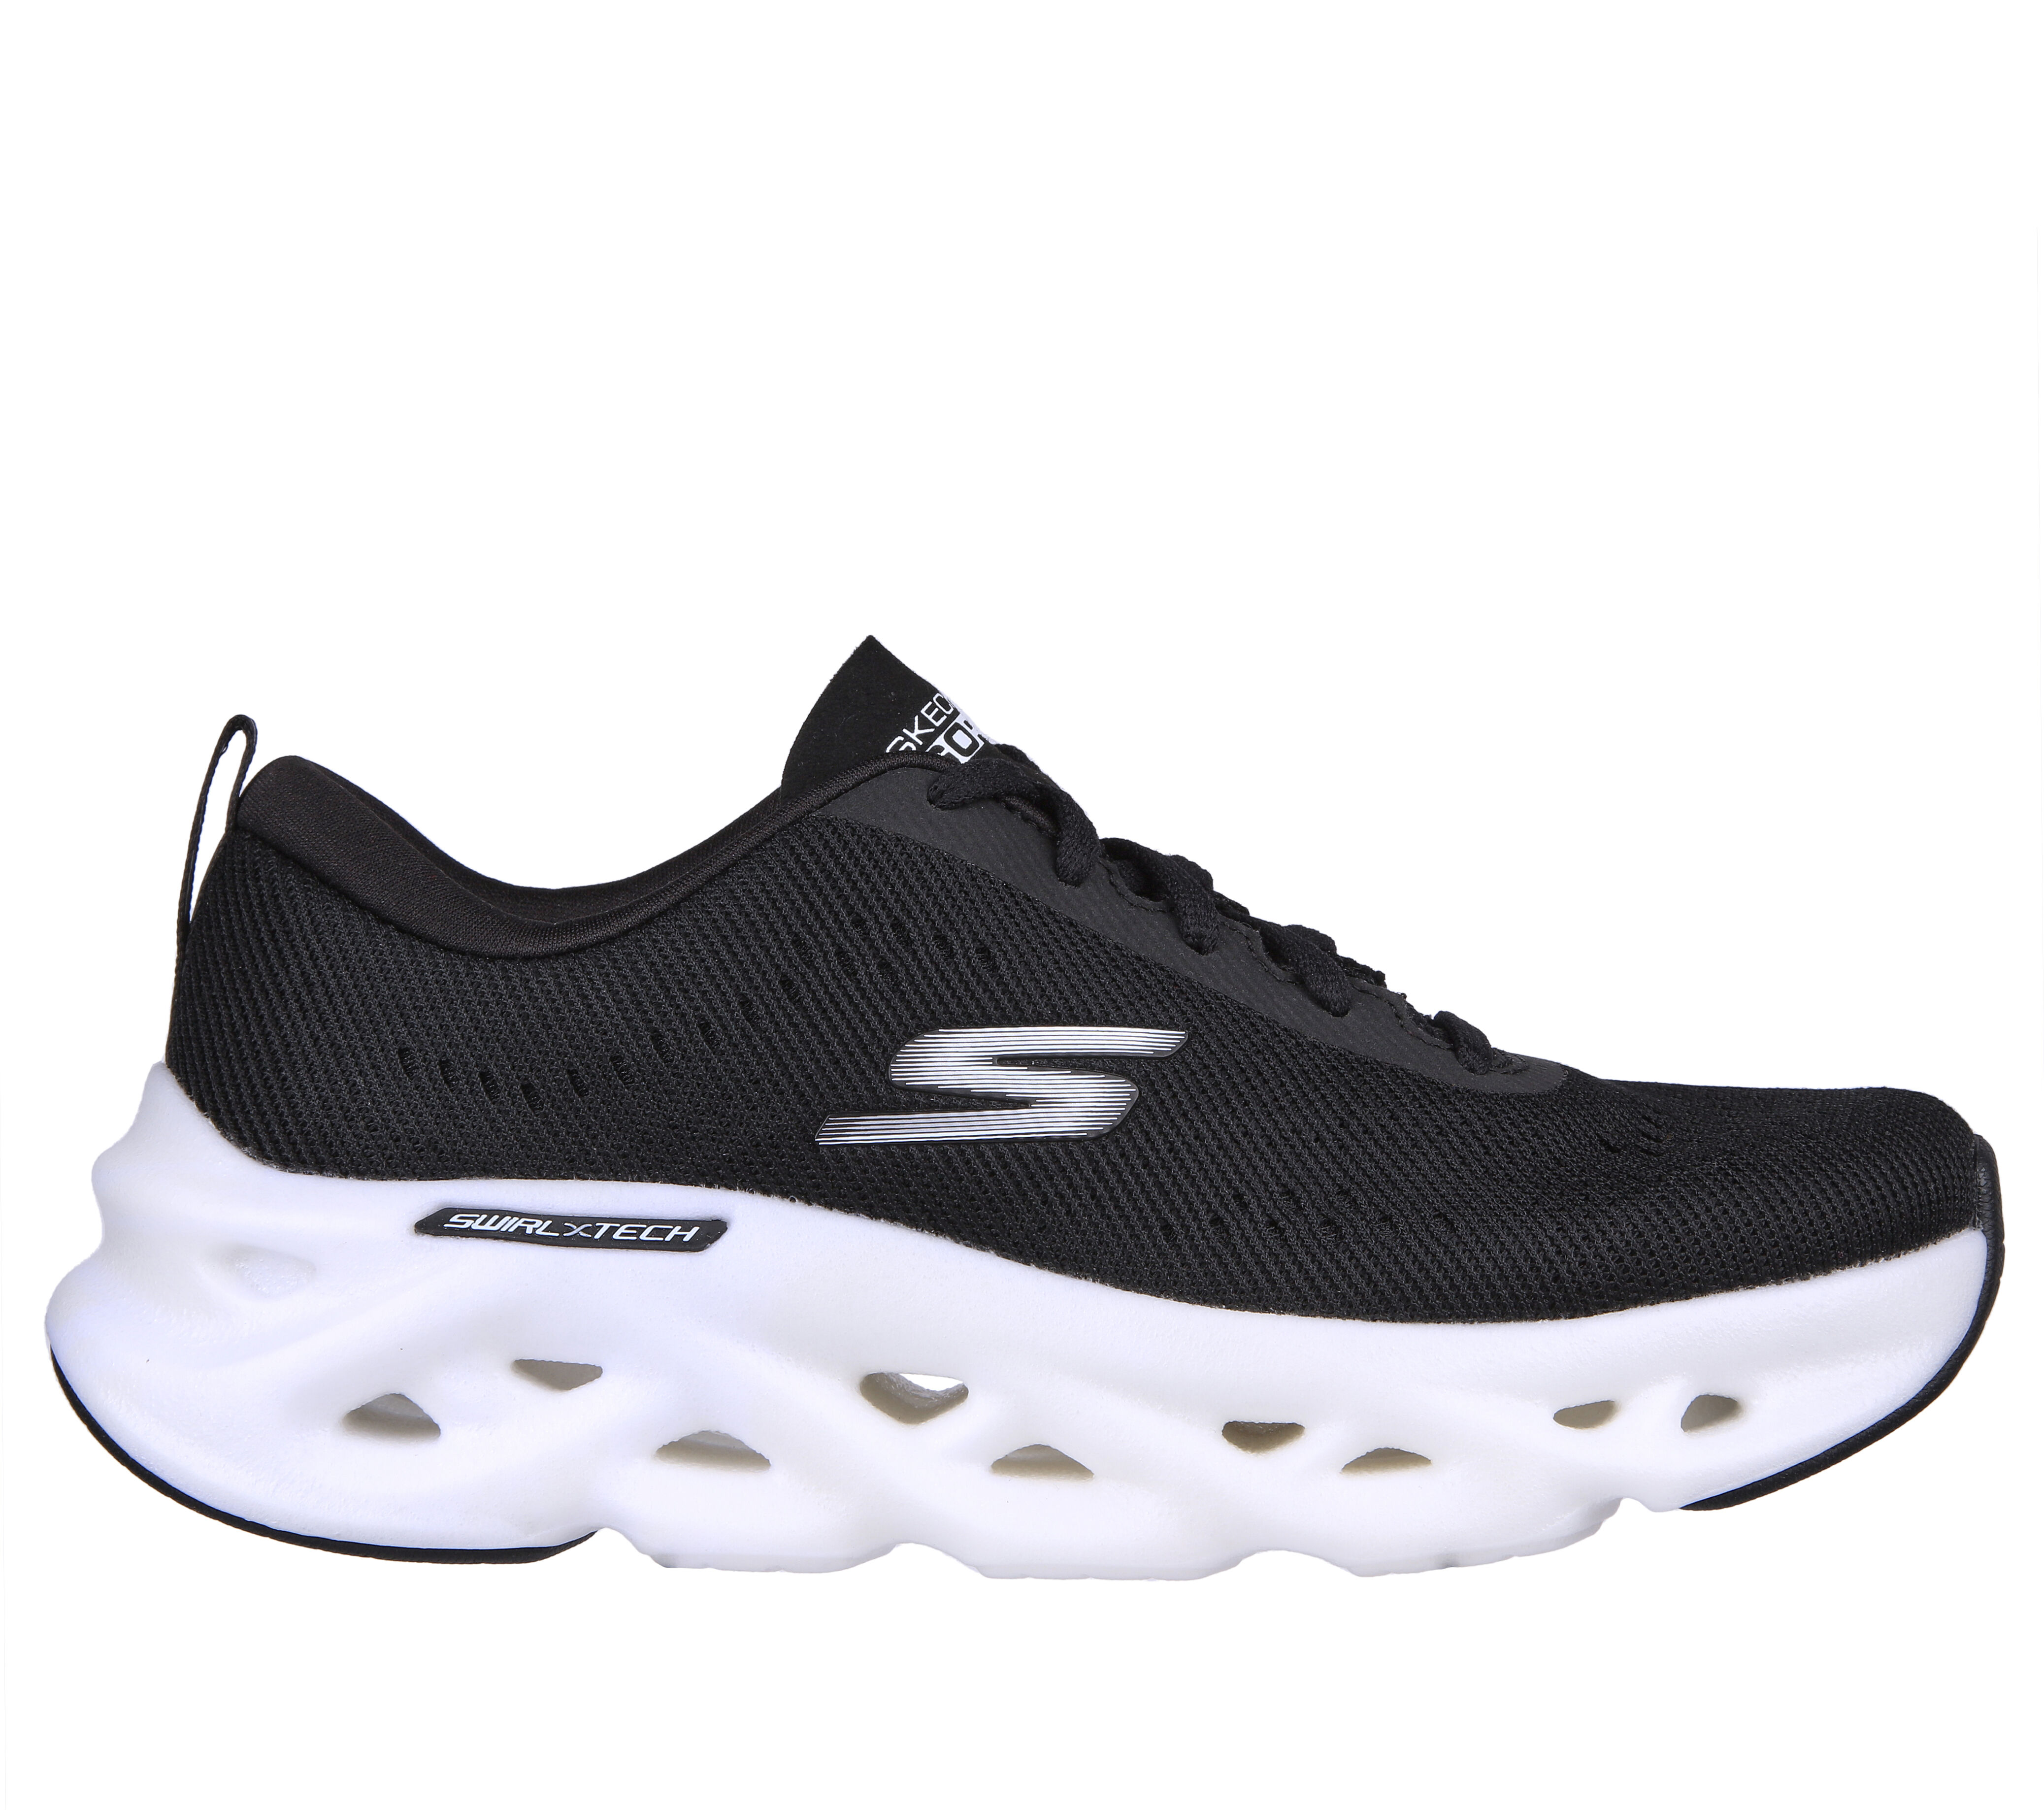 Shop by Skechers Collection | Collections for Men \u0026 Women | SKECHERS UK